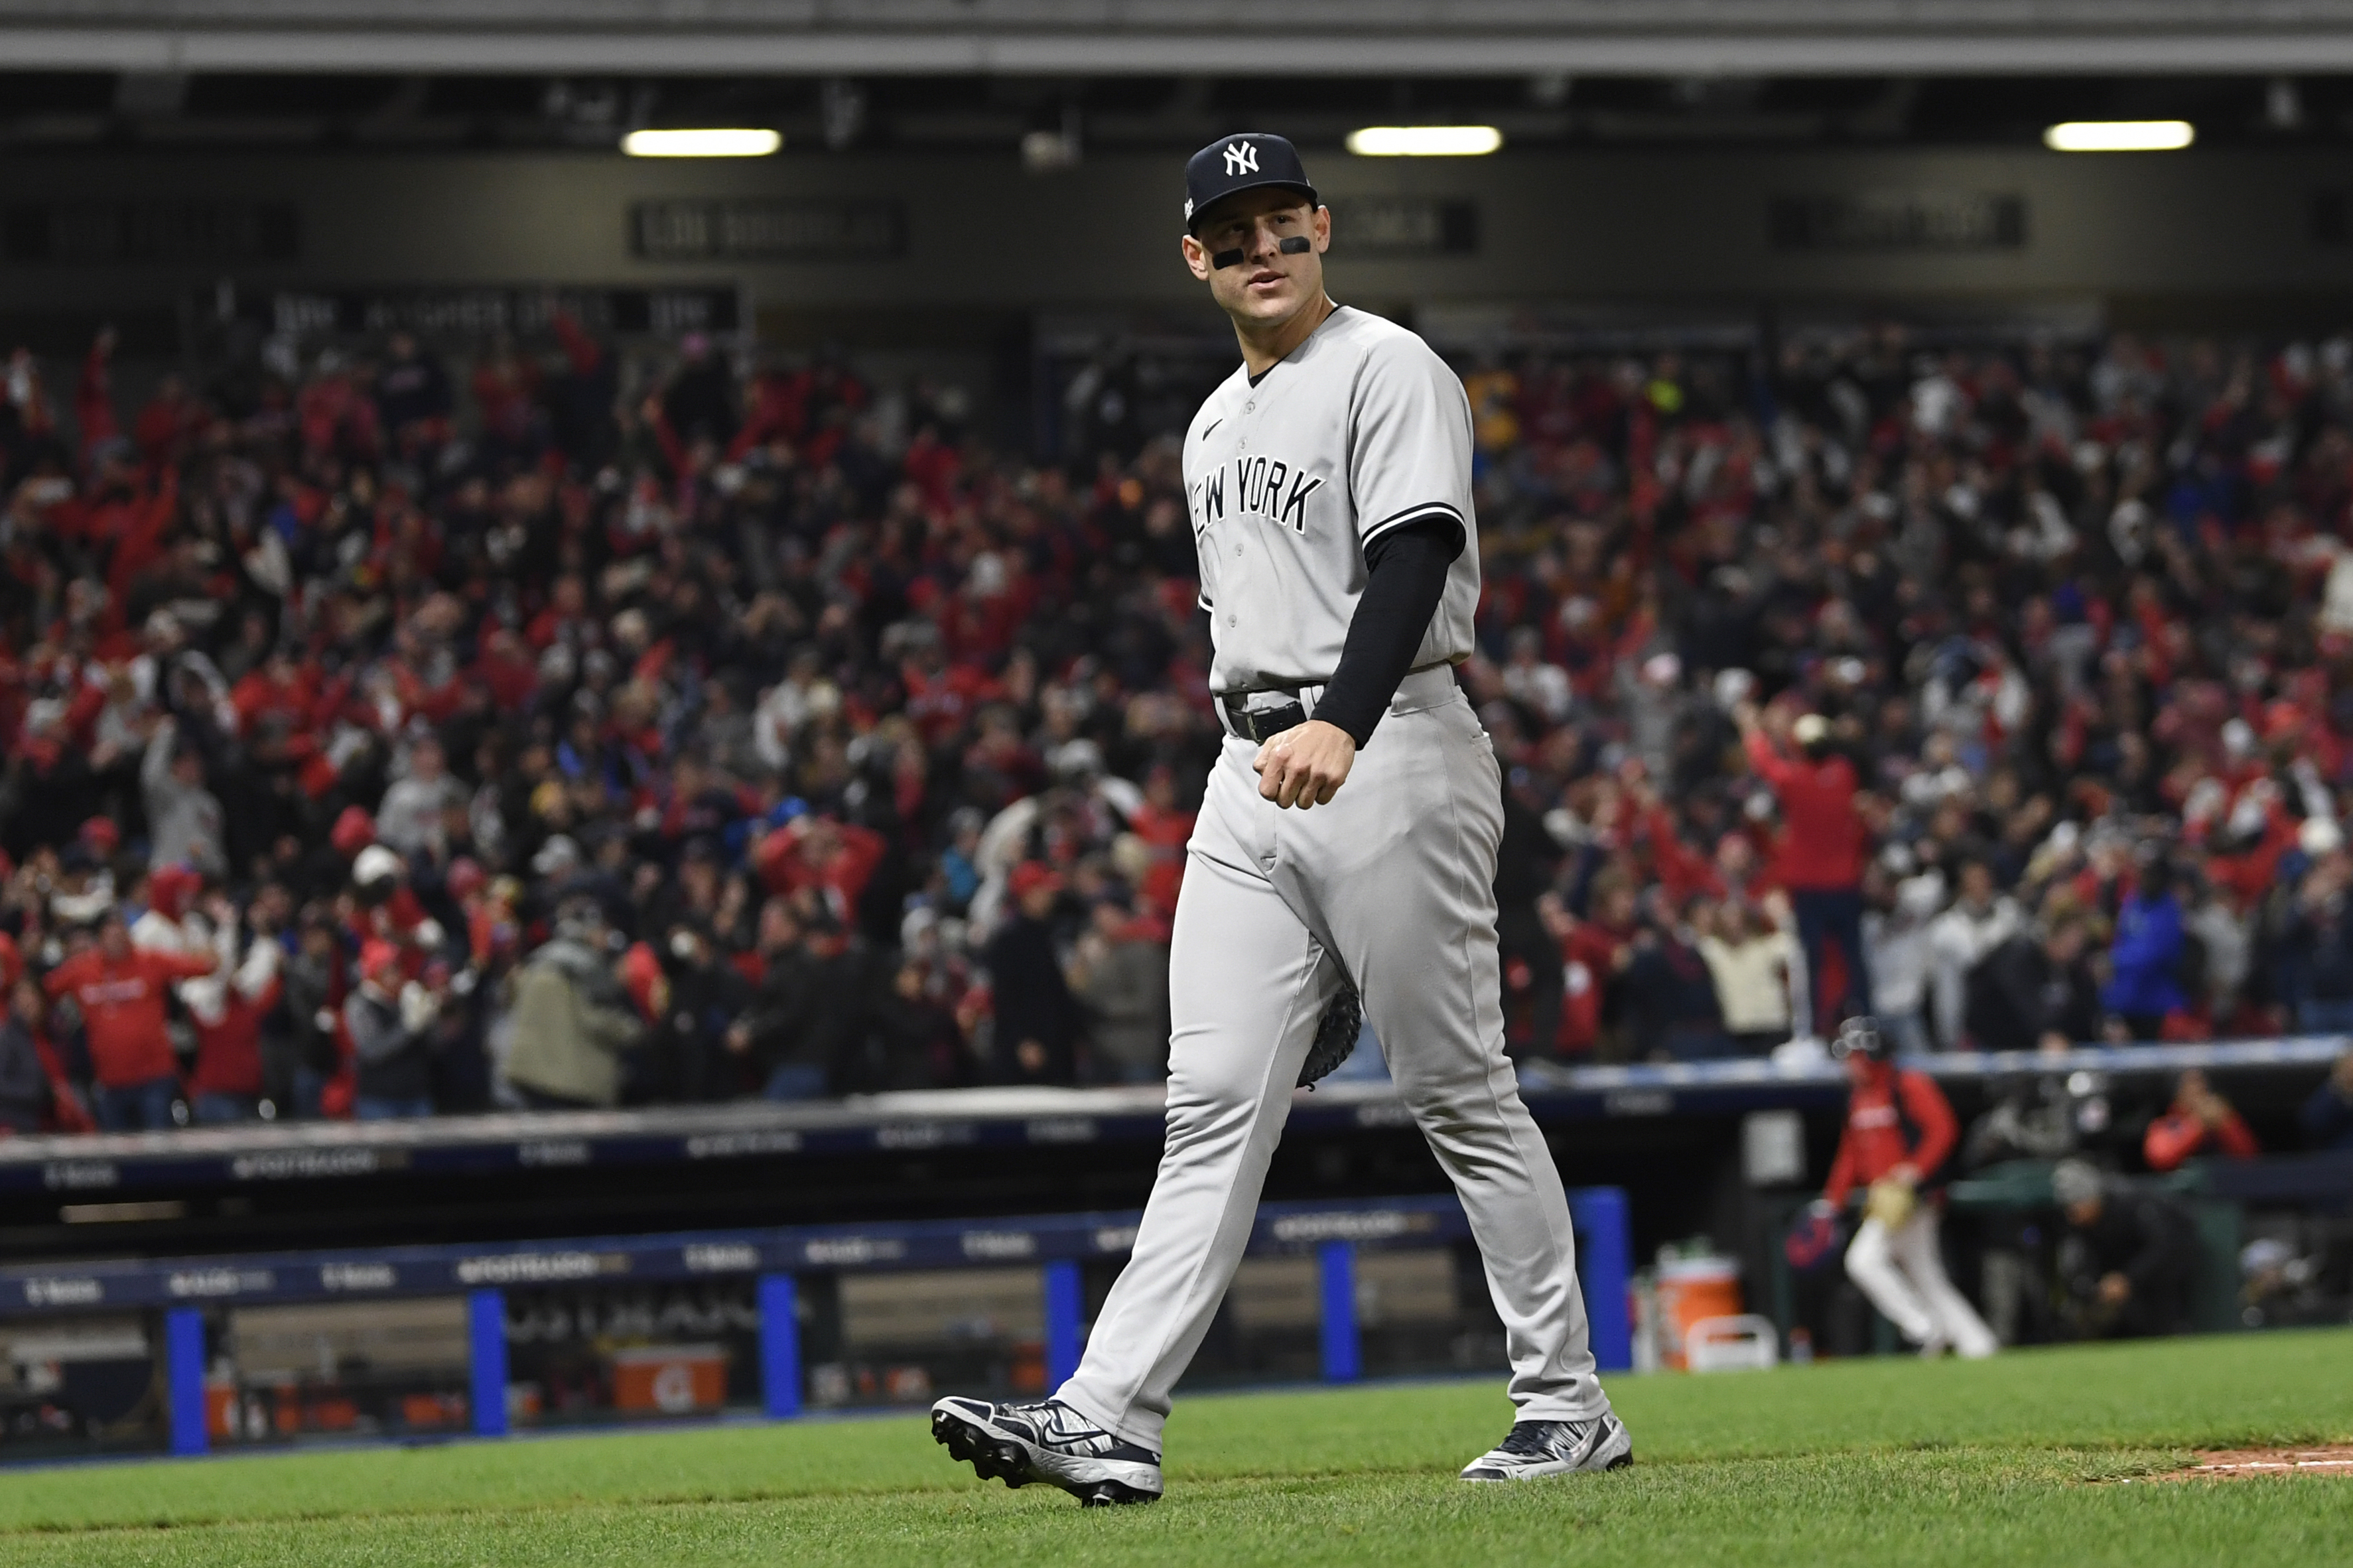 Yankees vs. Red Sox wild card game: Baseball's problems and promise in one  night.